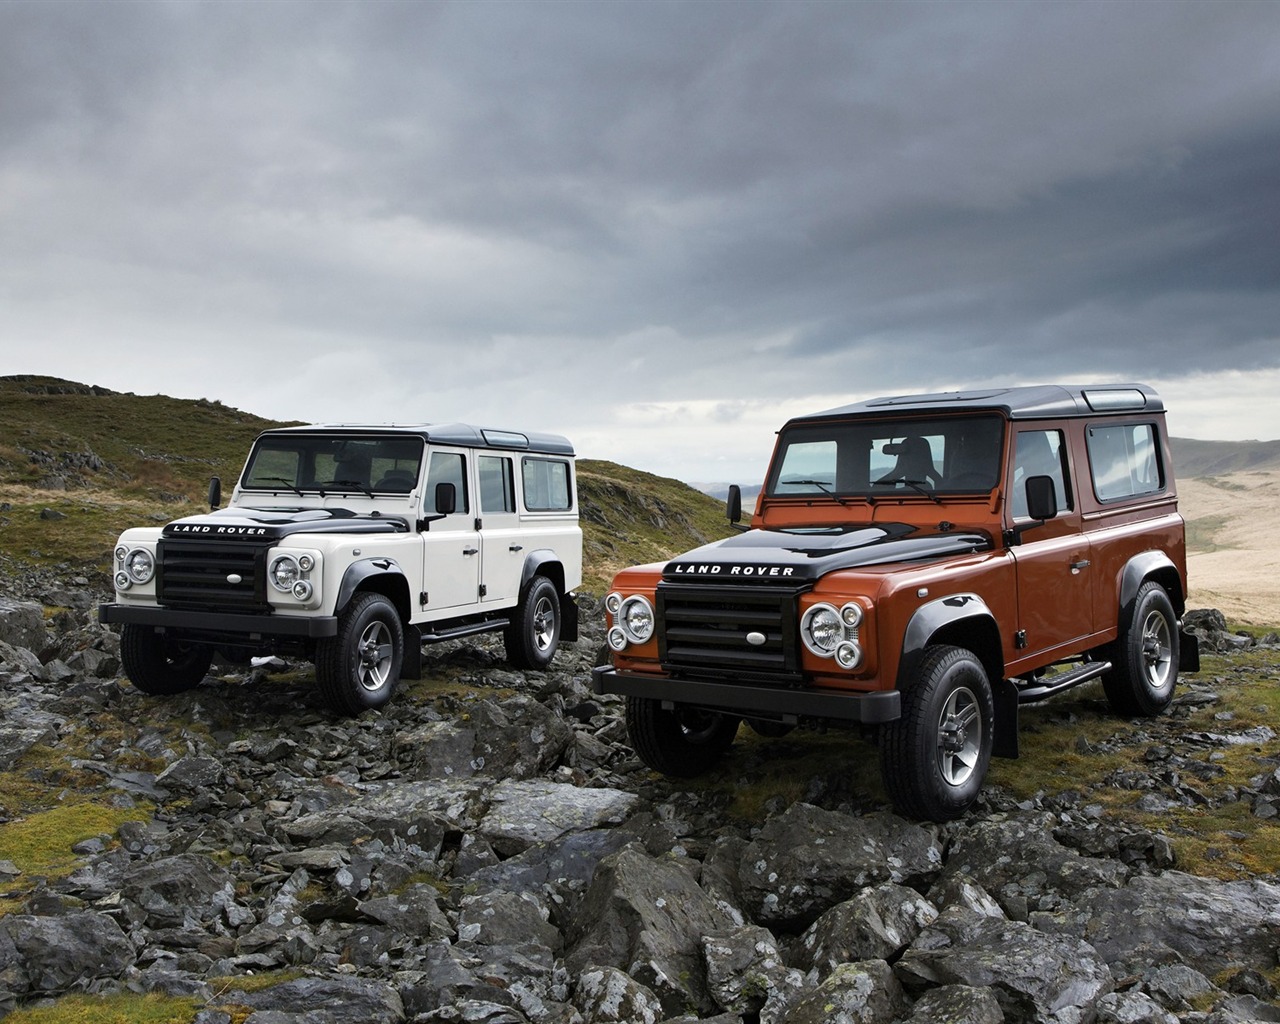 Land Rover wallpapers 2011 (1) #20 - 1280x1024